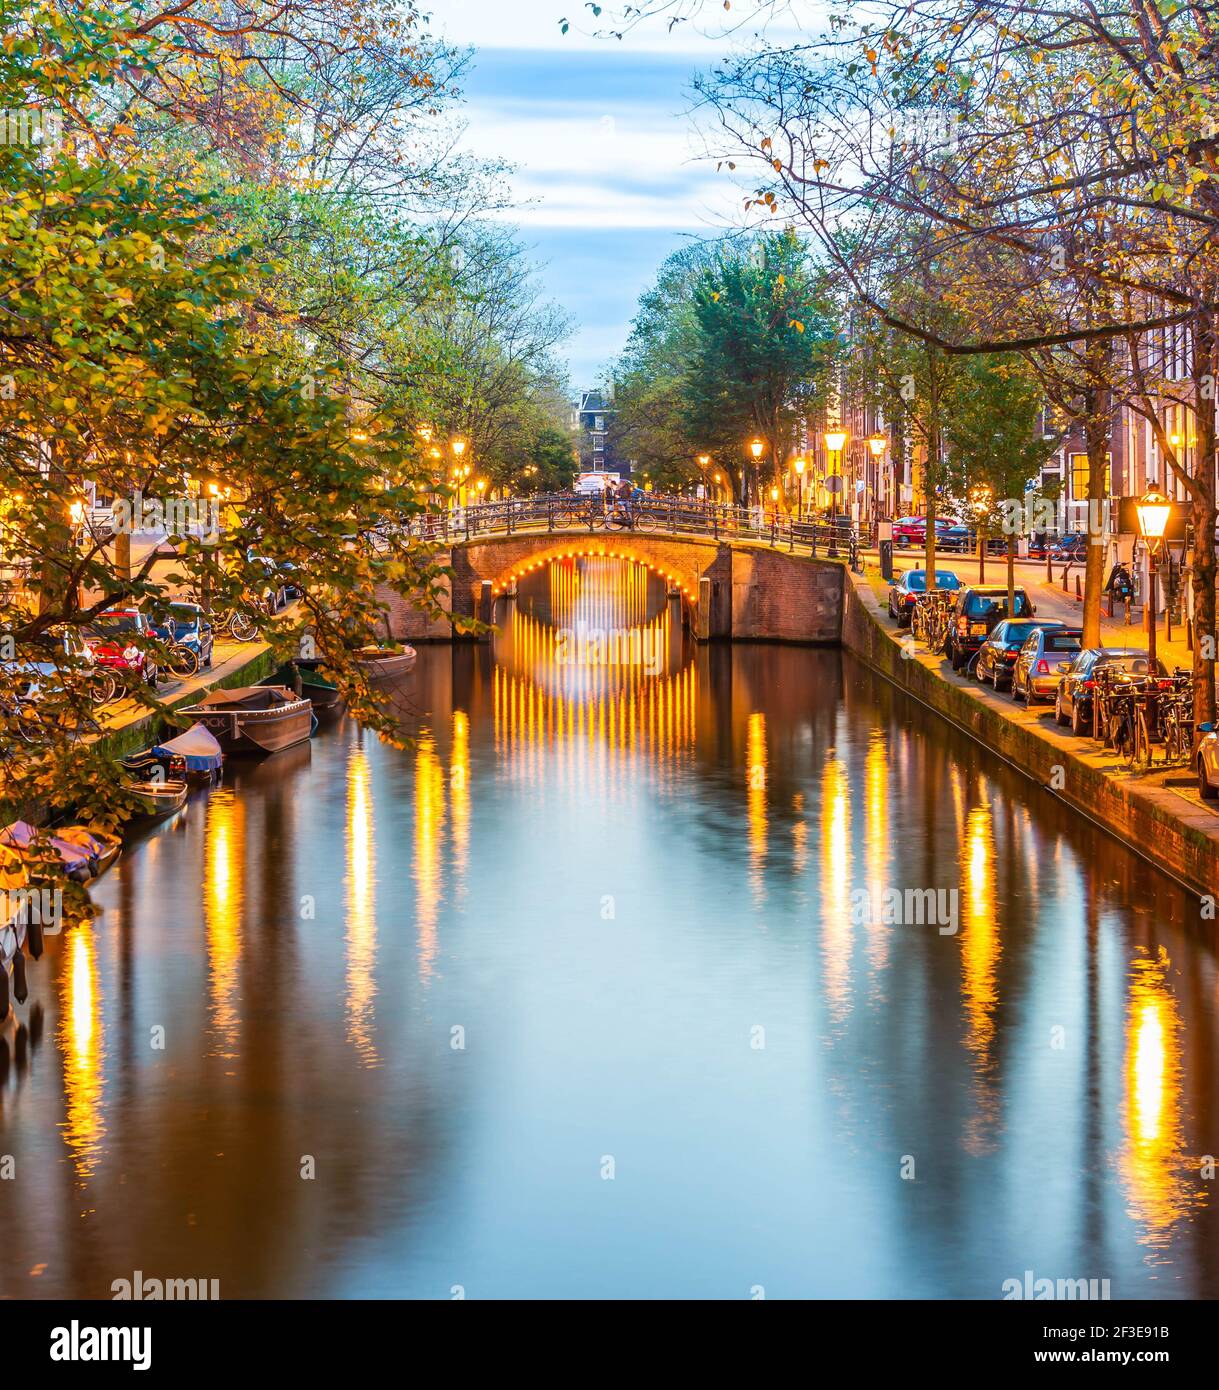 canal at night in Amsterdam in Holland, Netherlands Stock Photo